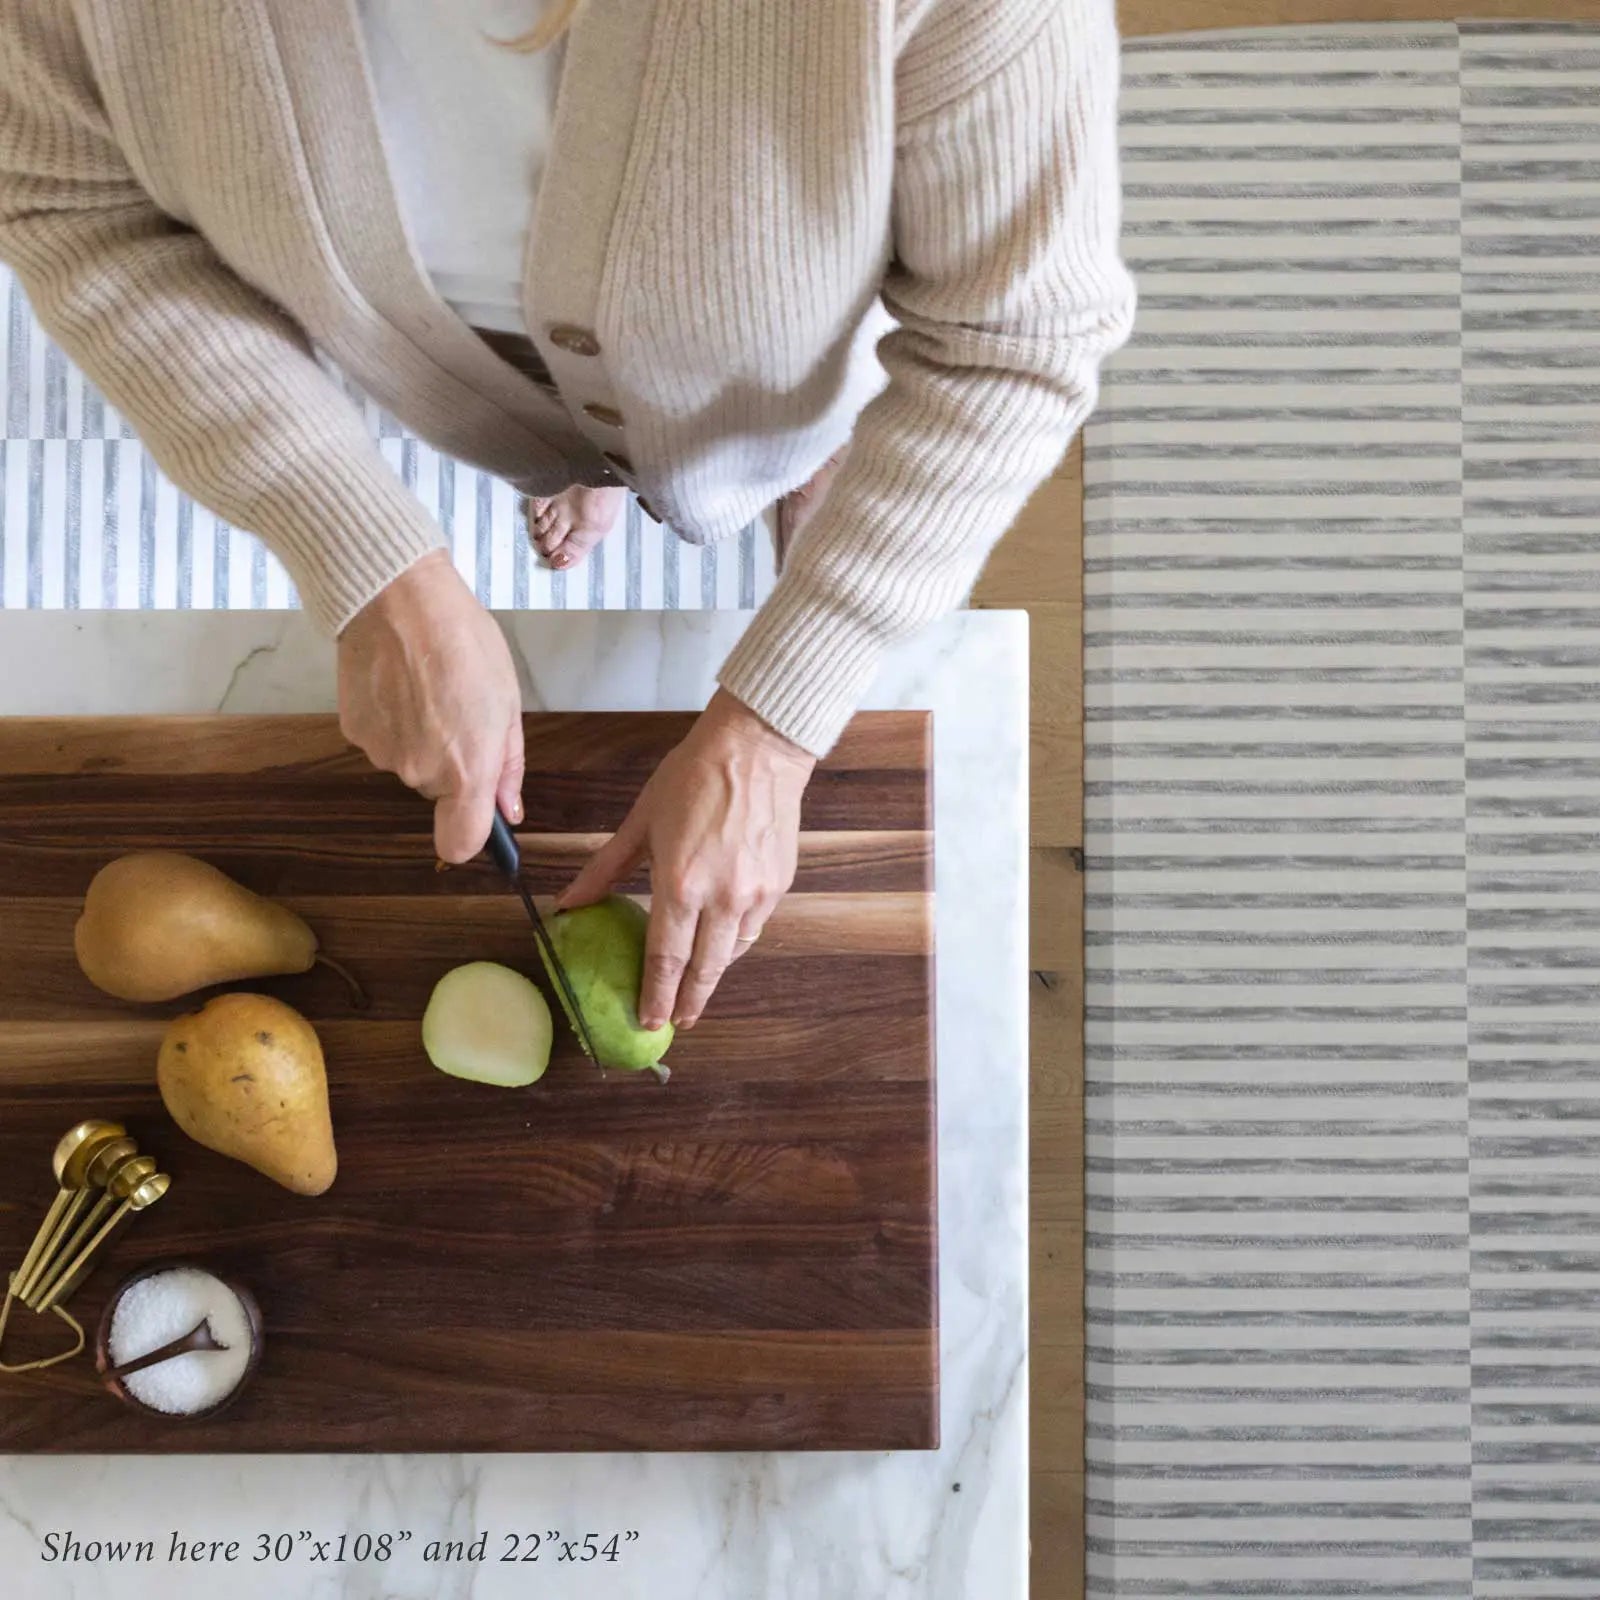 Reese pewter gray and white inverted stripe standing mat shown from above in kitchen in sizes 22x54 and 30x108 with woman cutting pears